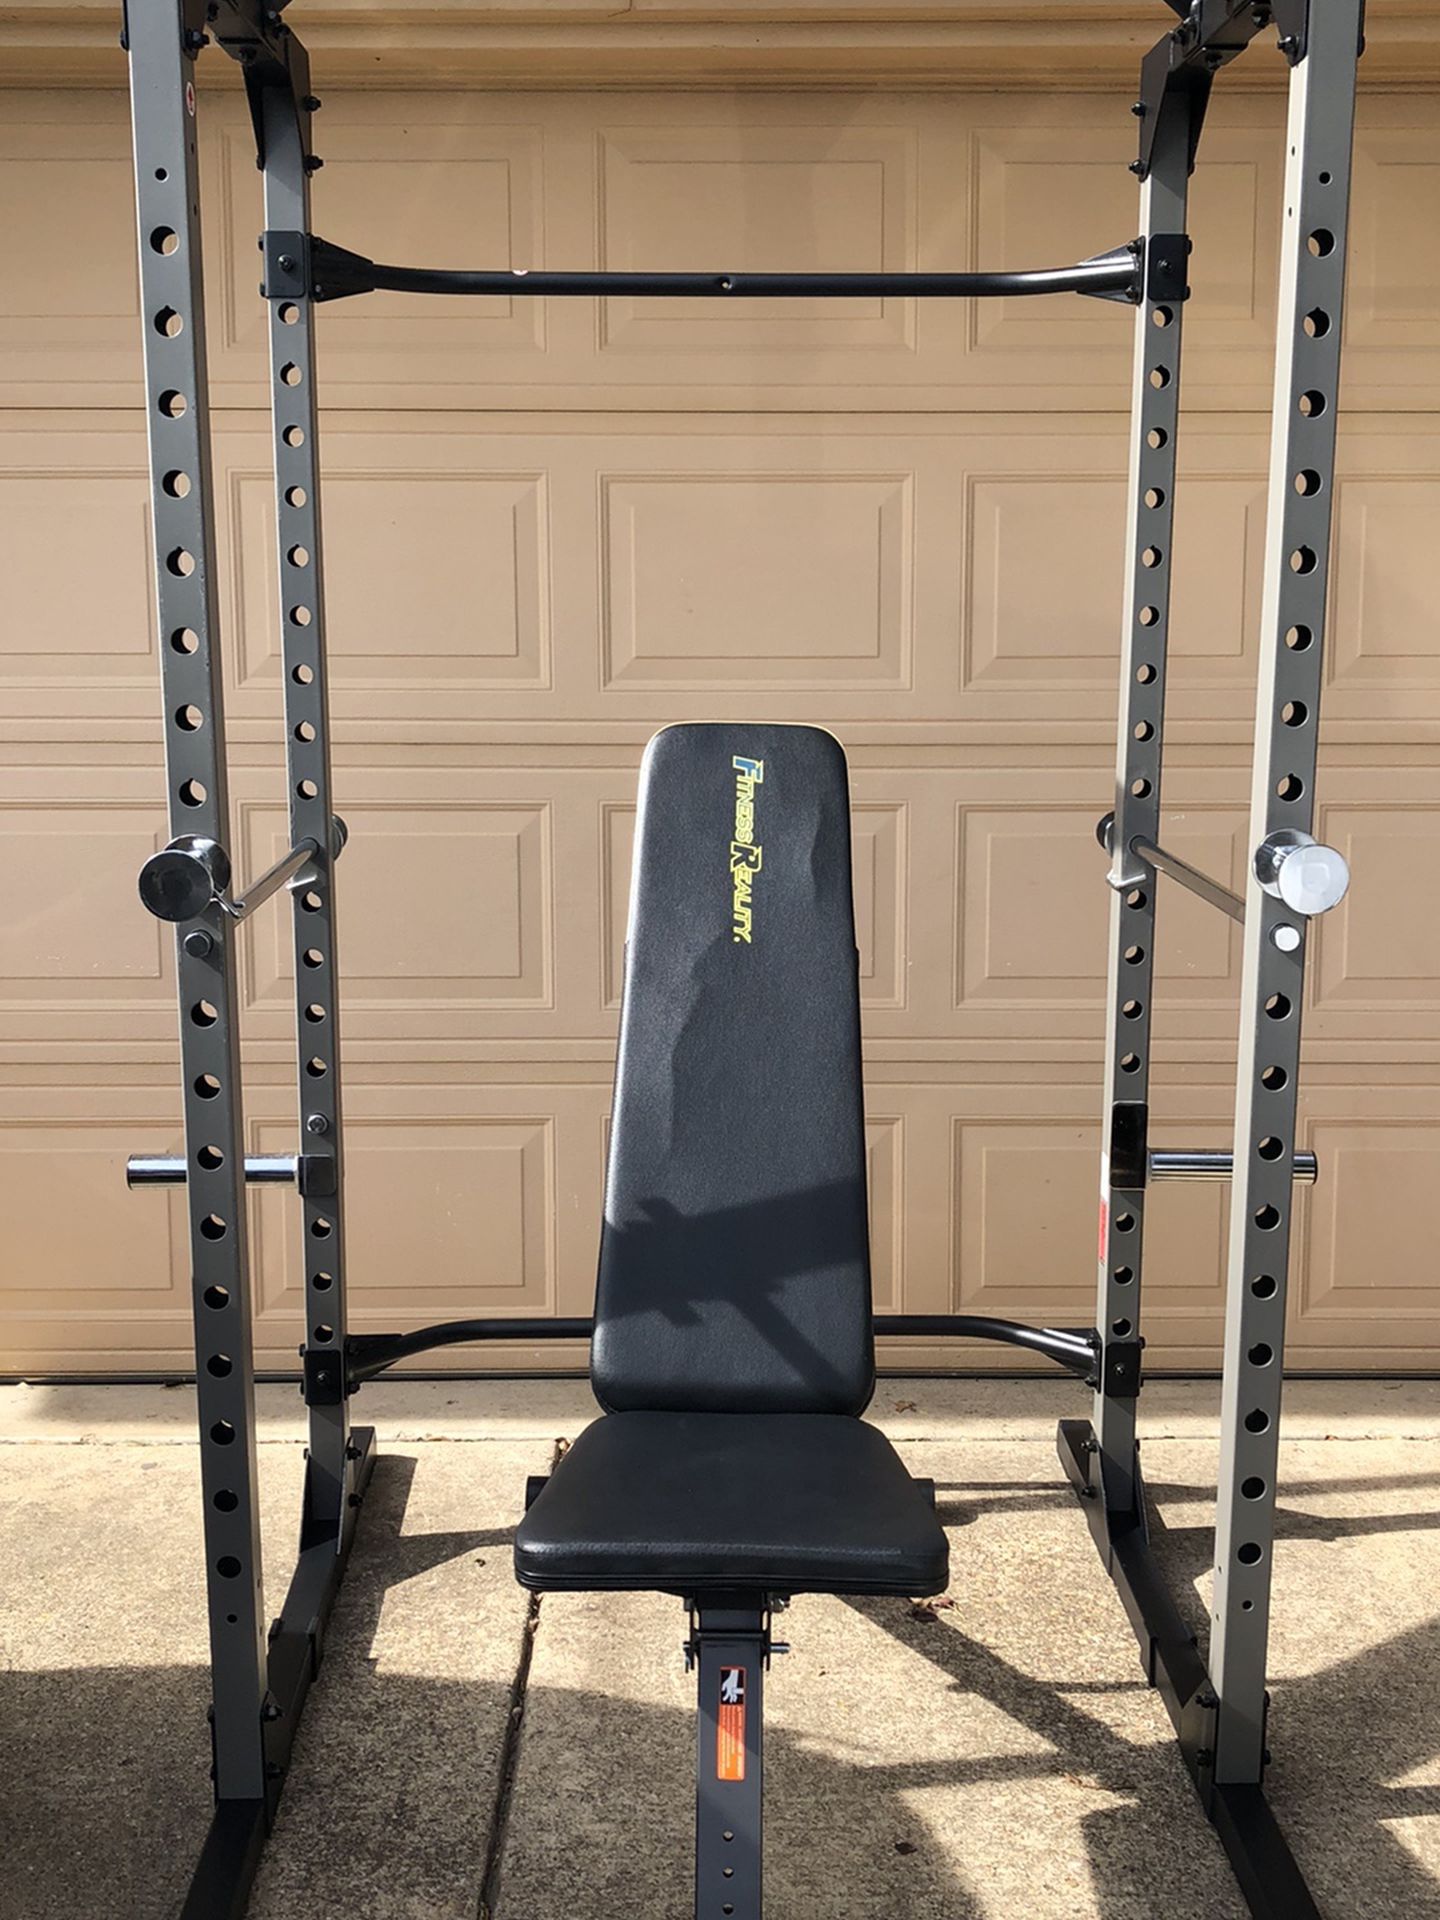 Fitness Reality/ Home Gym Equipment/ Gym Machine/ Squat Rack/ Weight Rack/ Bench Press/ Pull Up Bar/